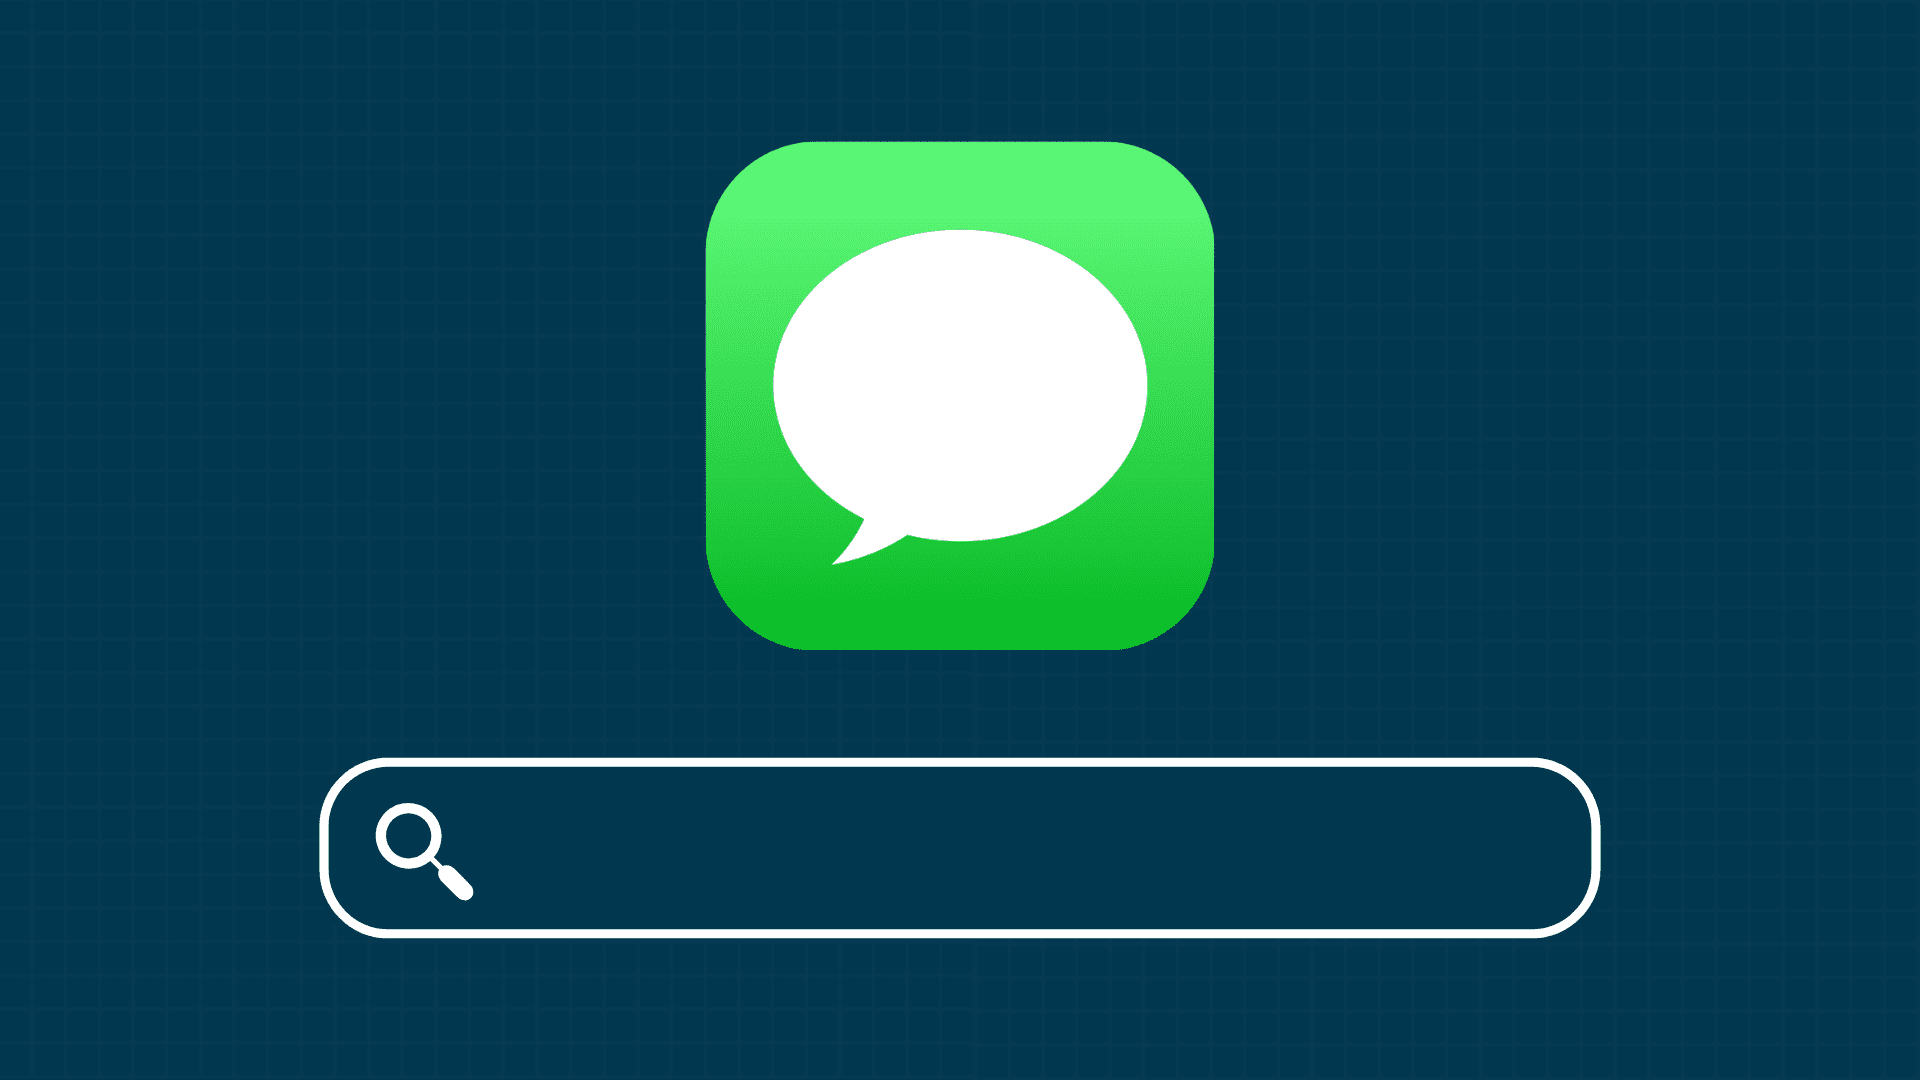 Search the Apple Messages app